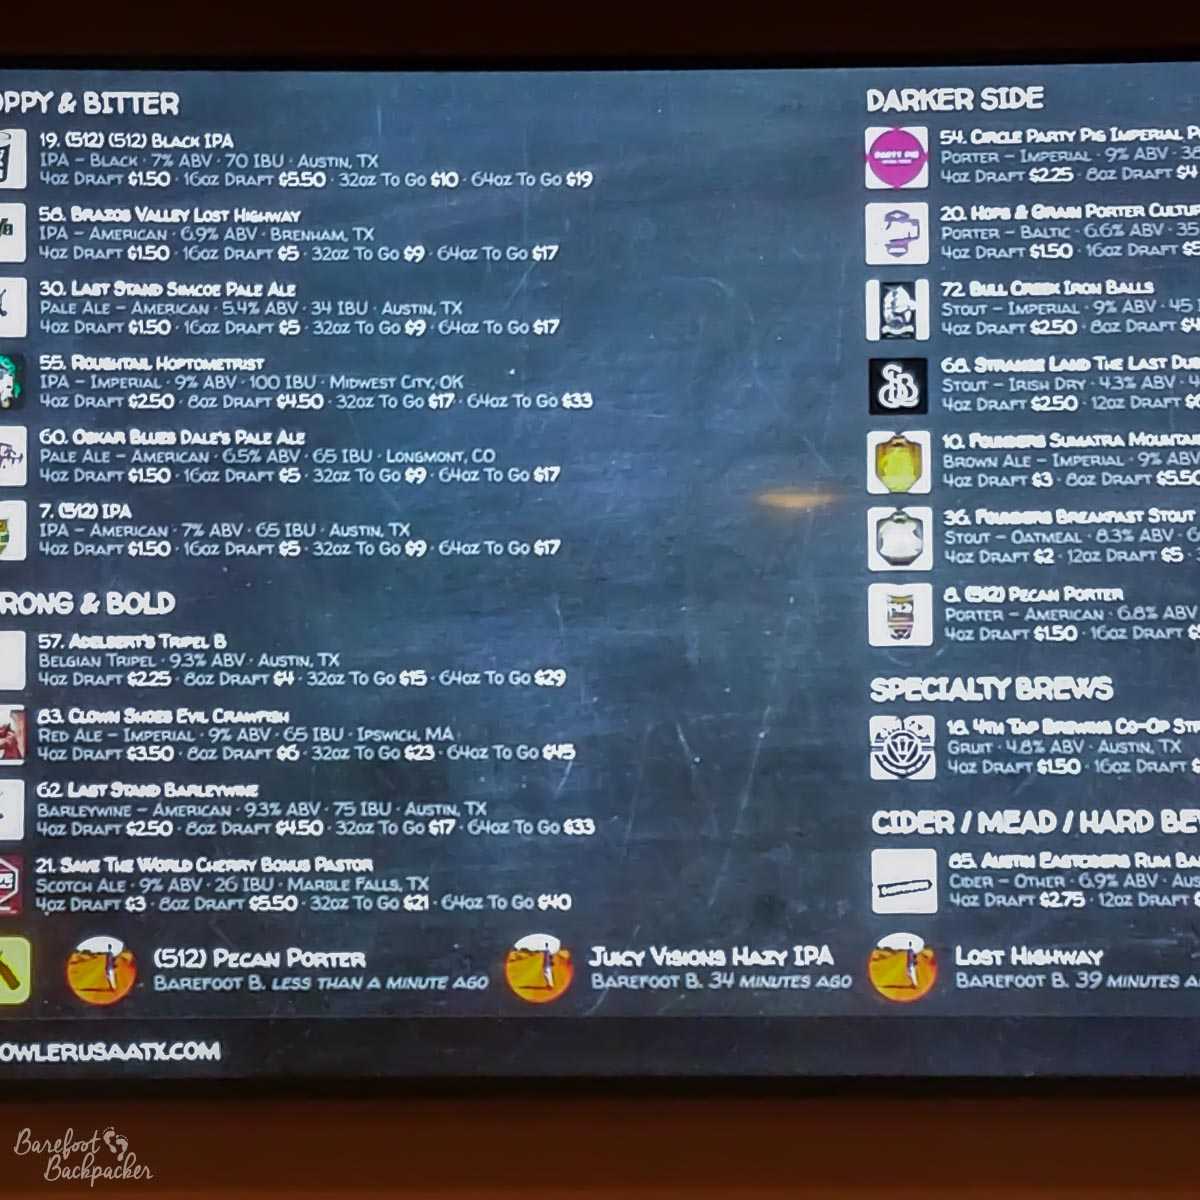 List of beers at Growler USA, Austin TX